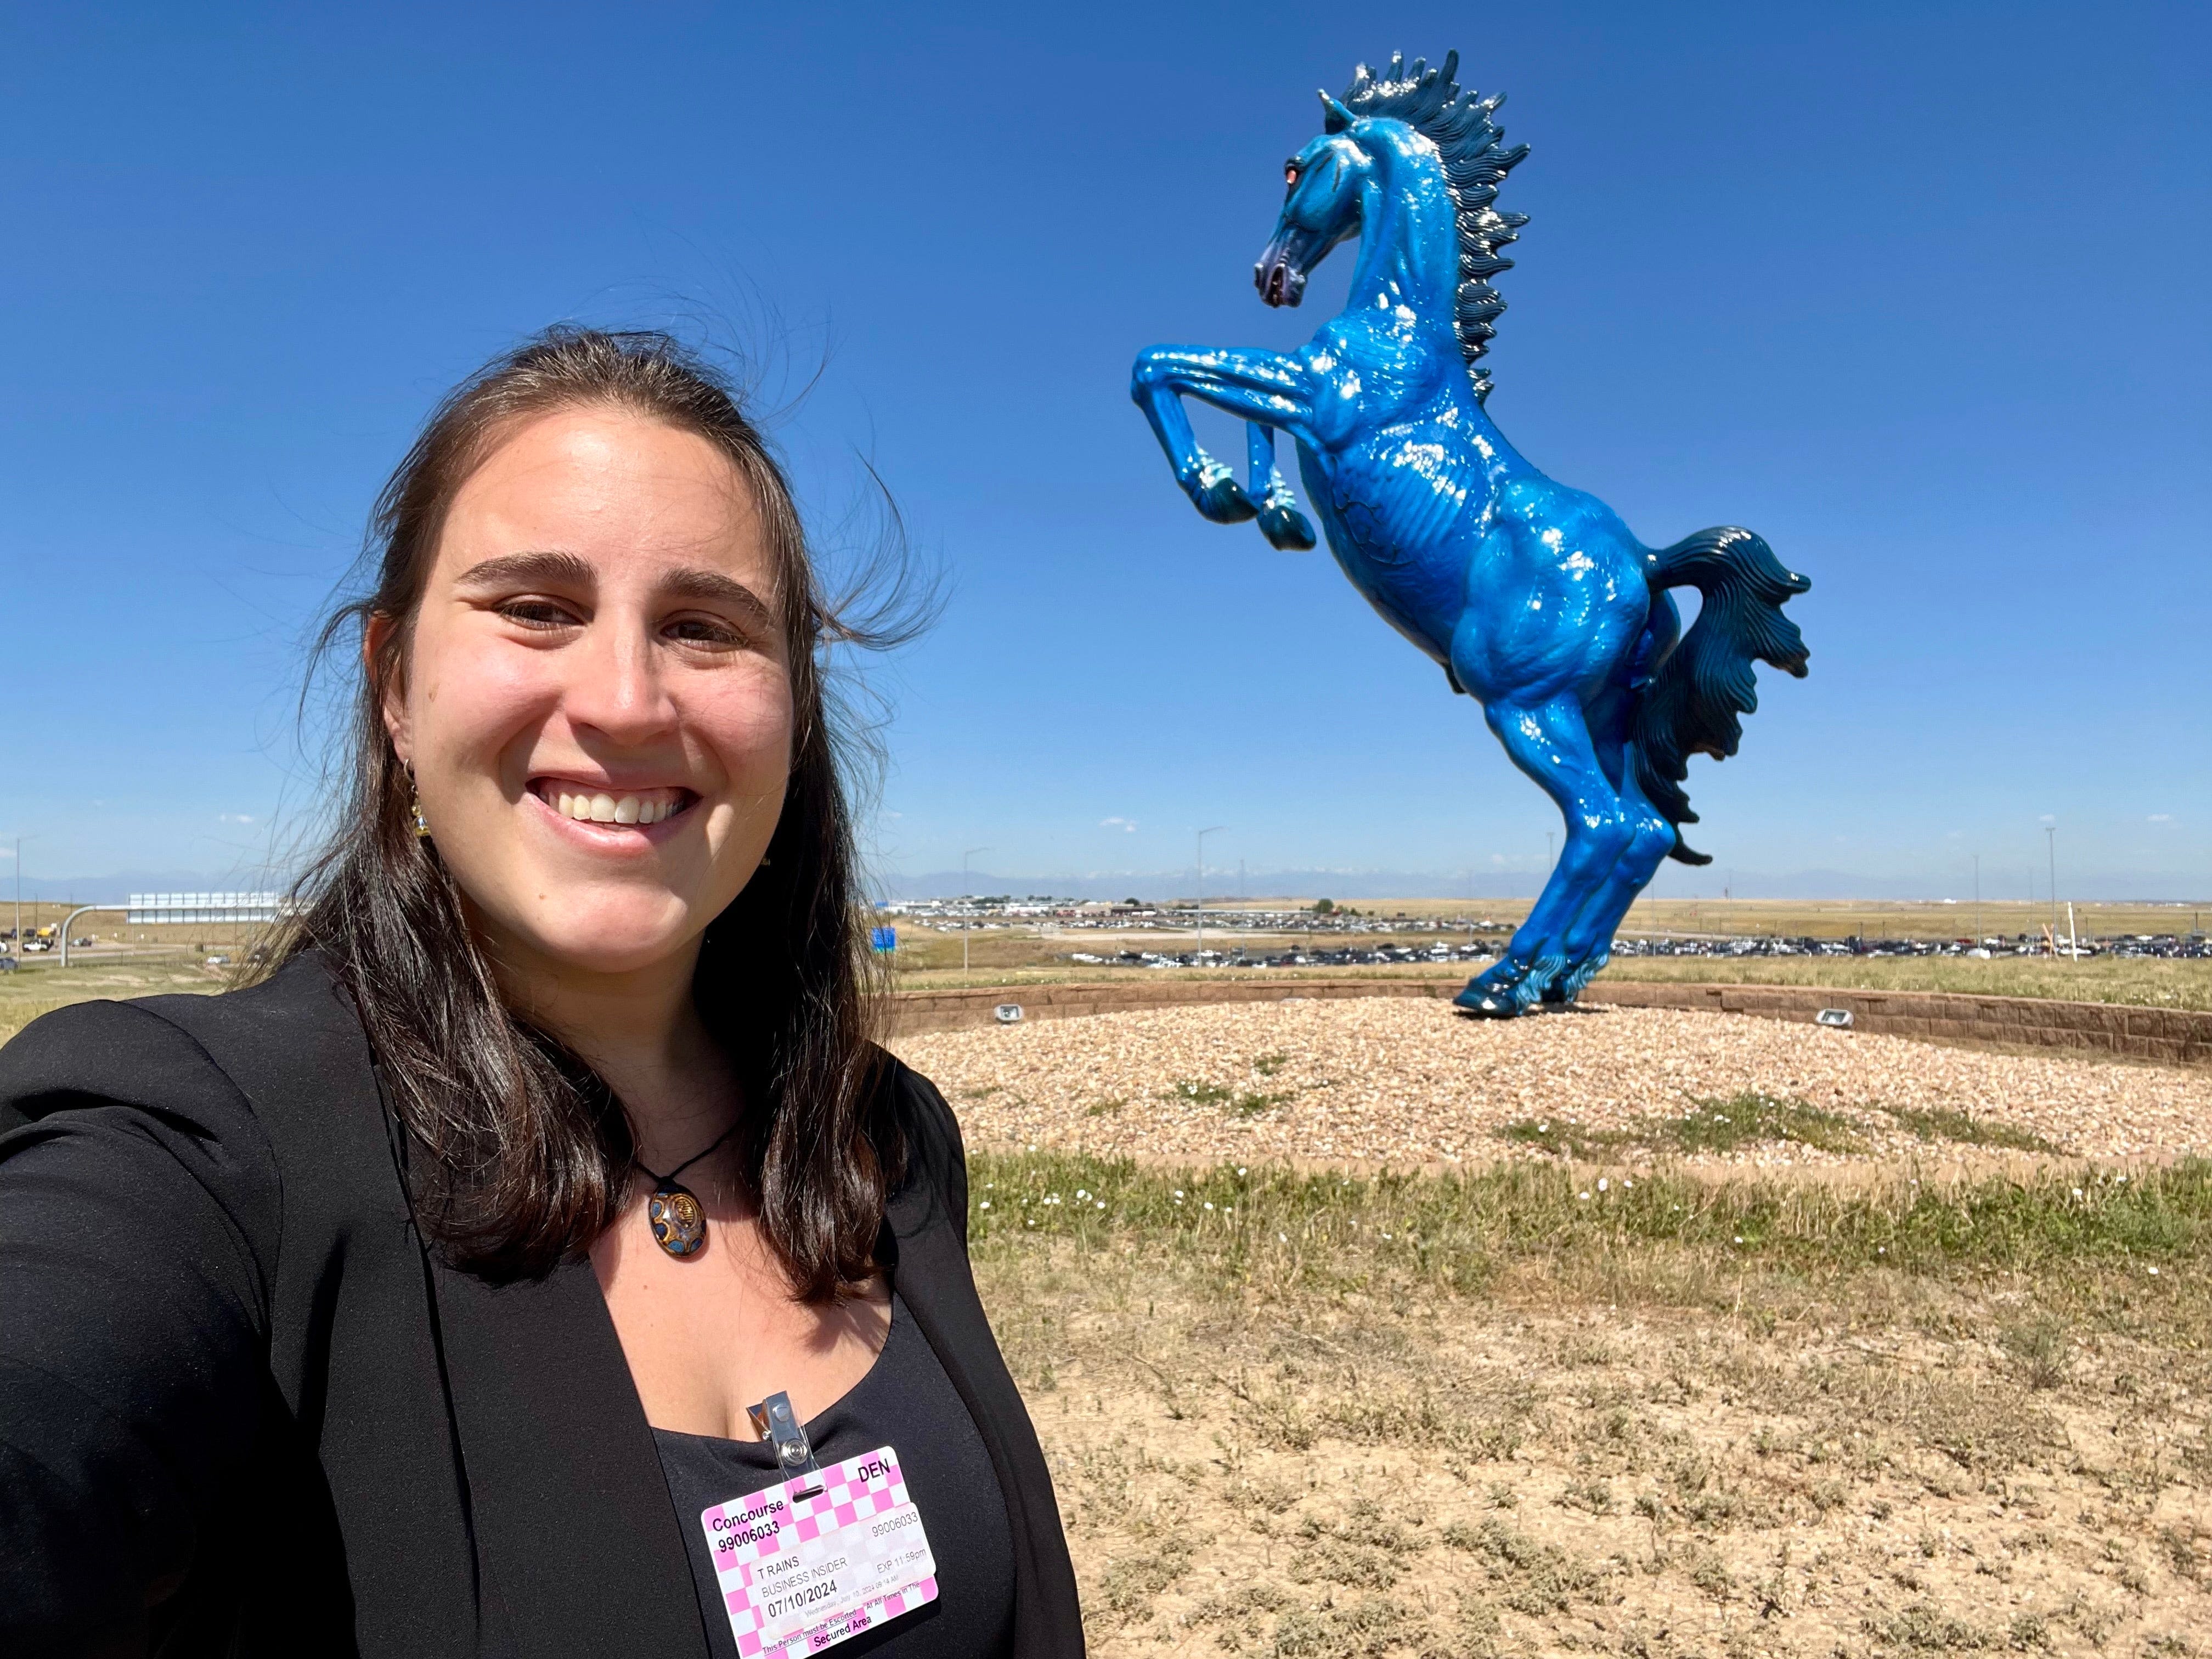 I got a behind-the-scenes tour of the conspiracy theory-filled Denver Airport to see its 'secret' tunnels and 'cursed' horse